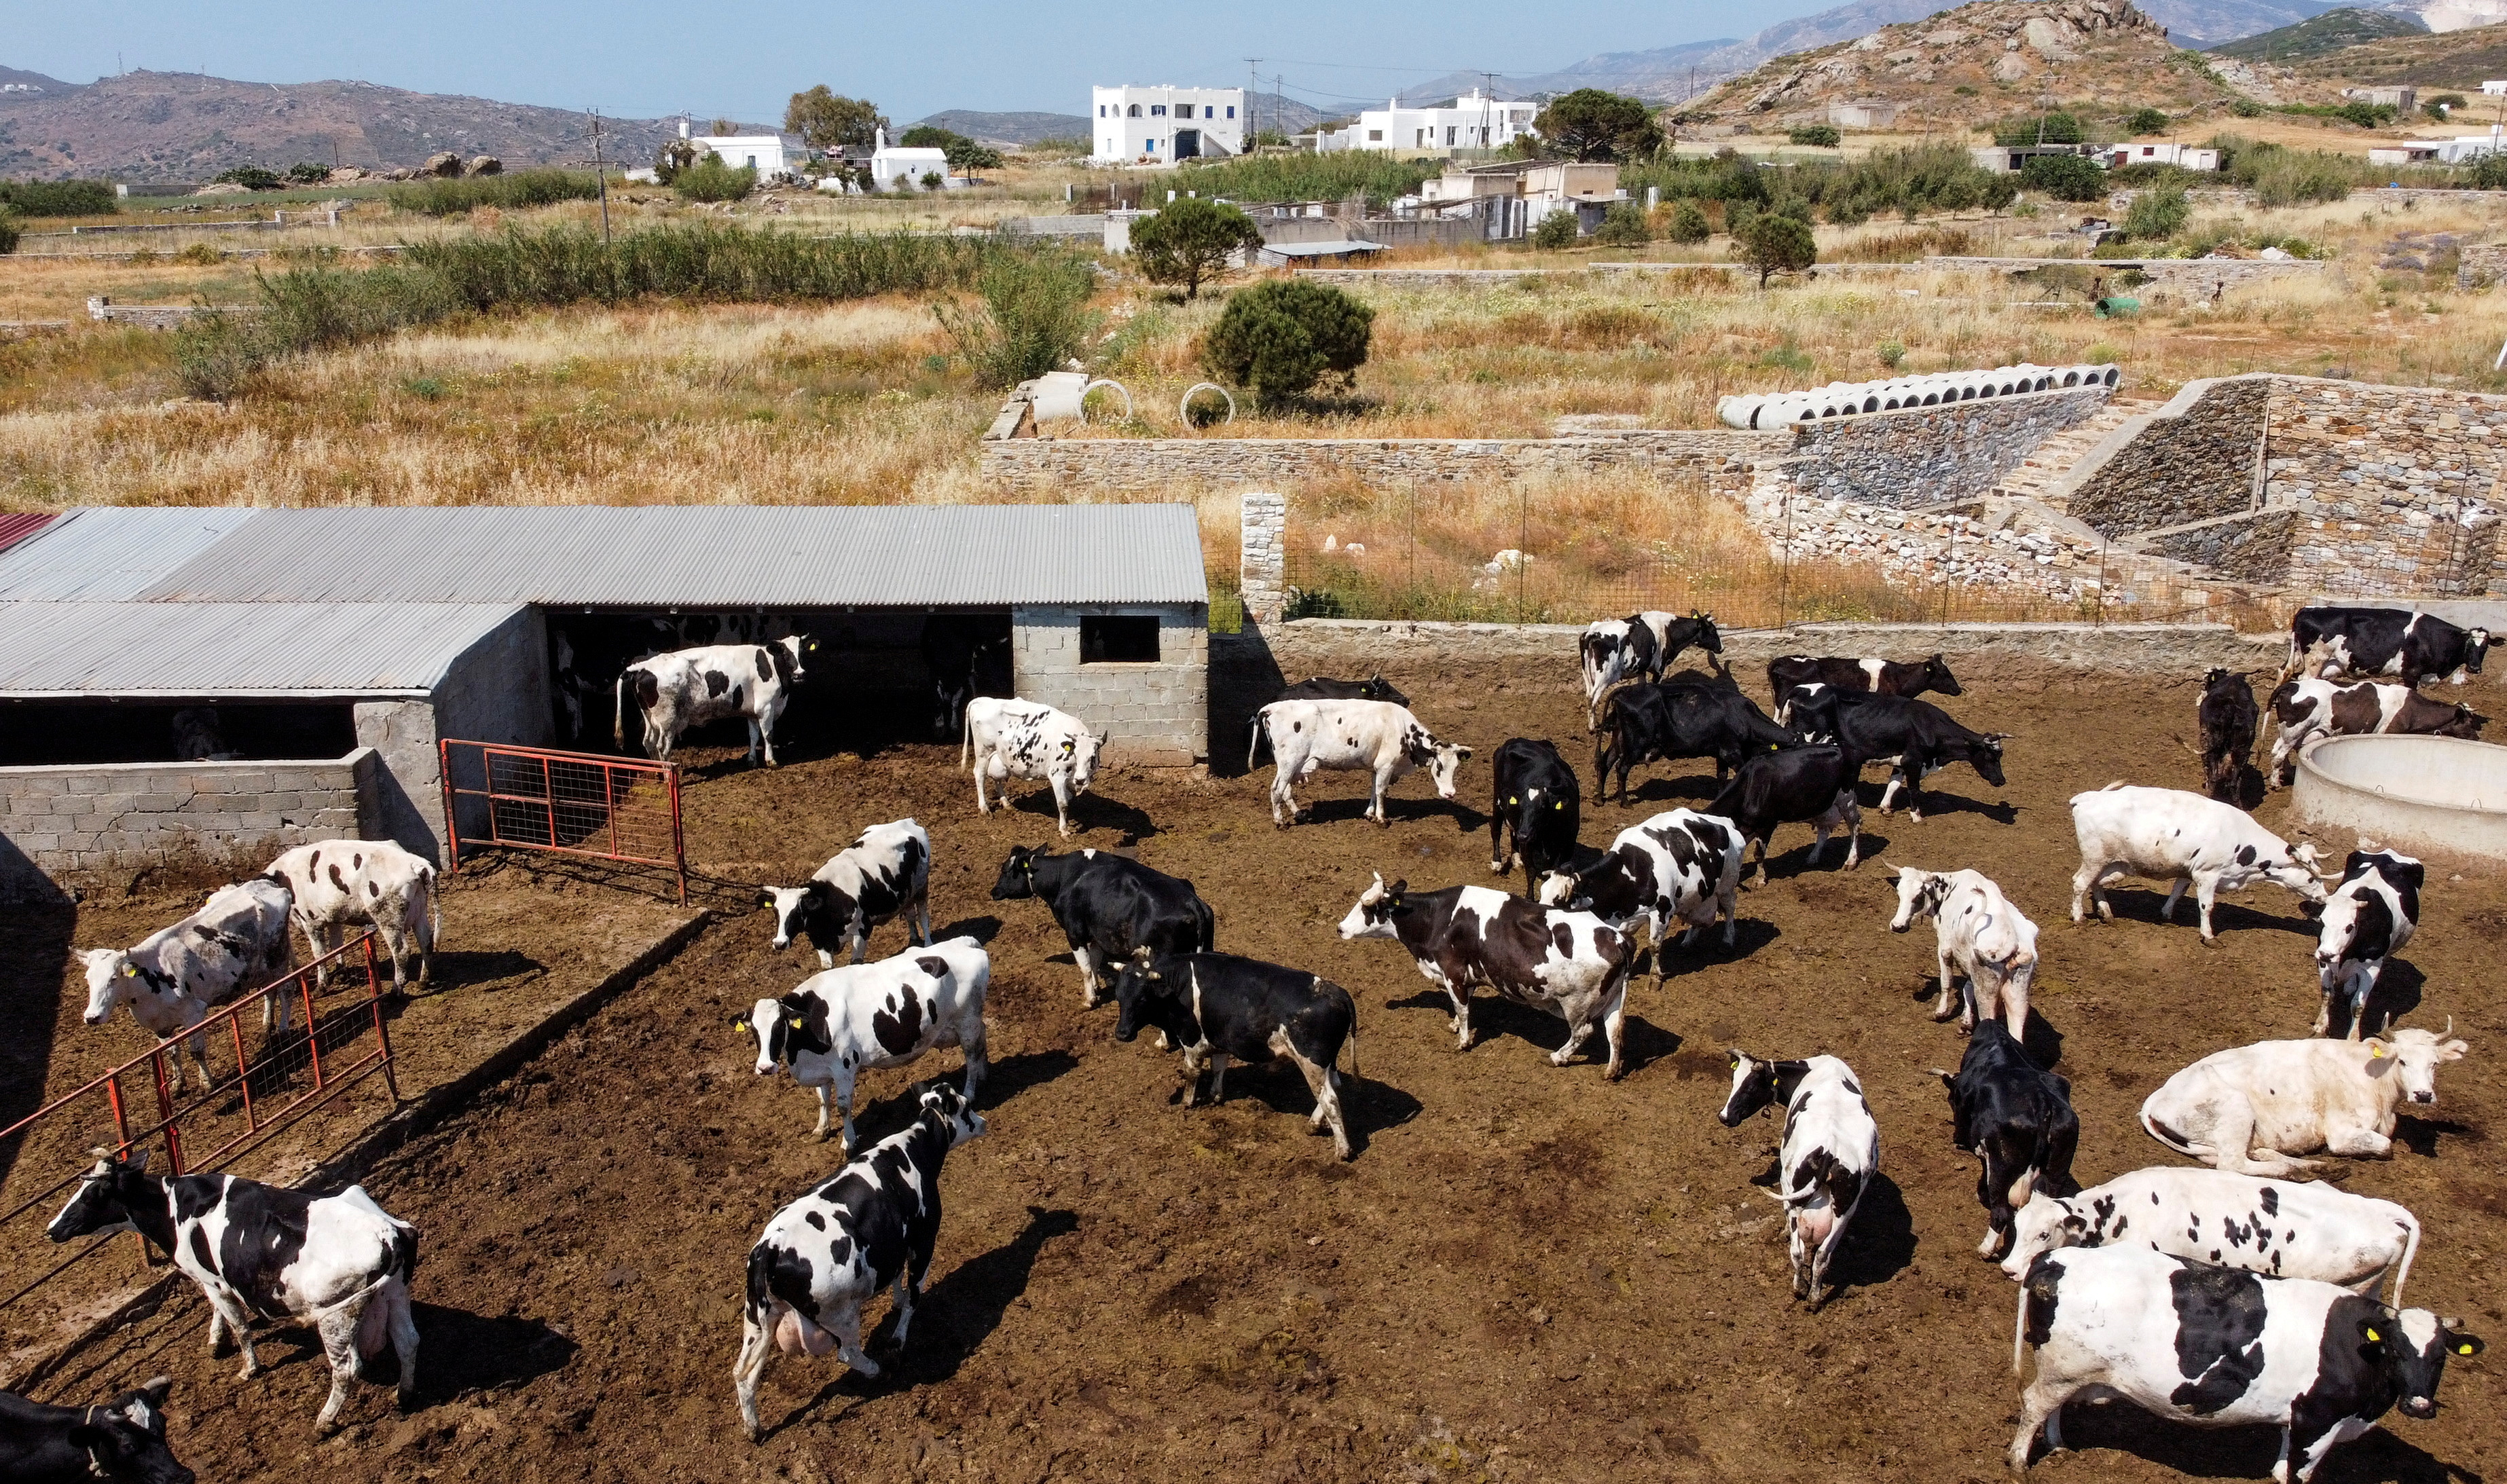 Cows are seen on a farm on the island of Naxos